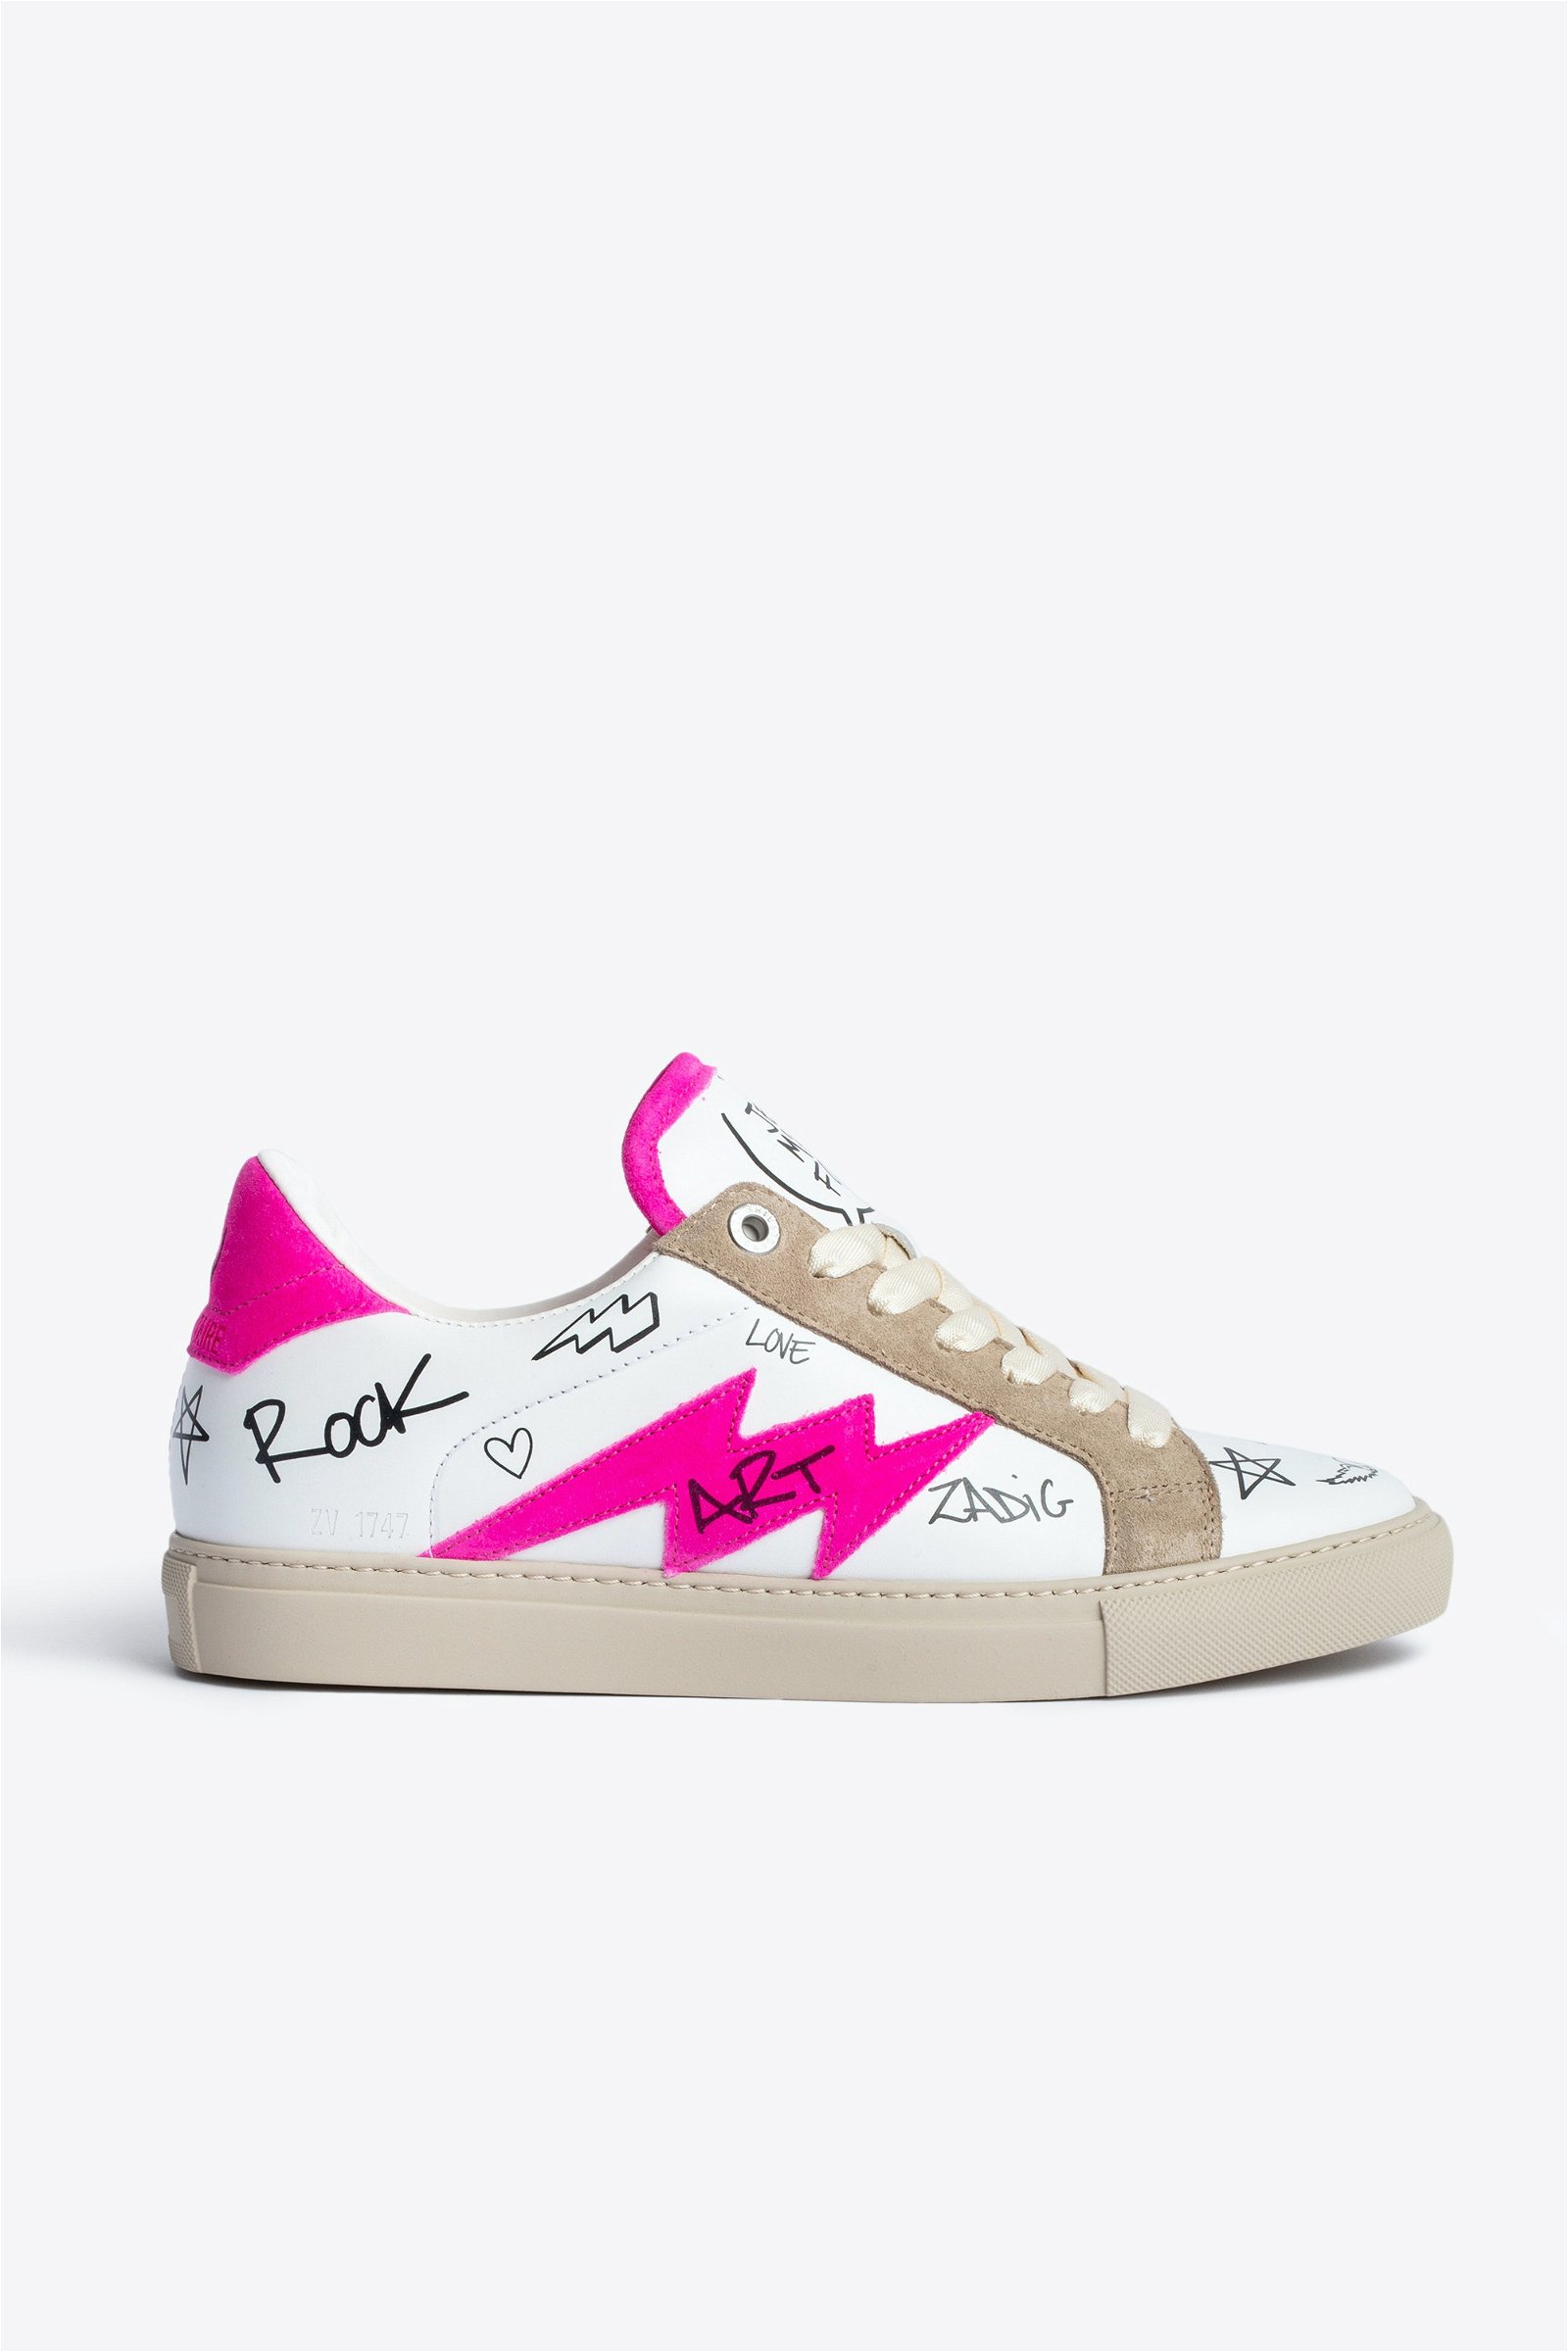 Zadig & Voltaire, Shoes, Zadig Voltaire Zv747 Charms Print Sneakers